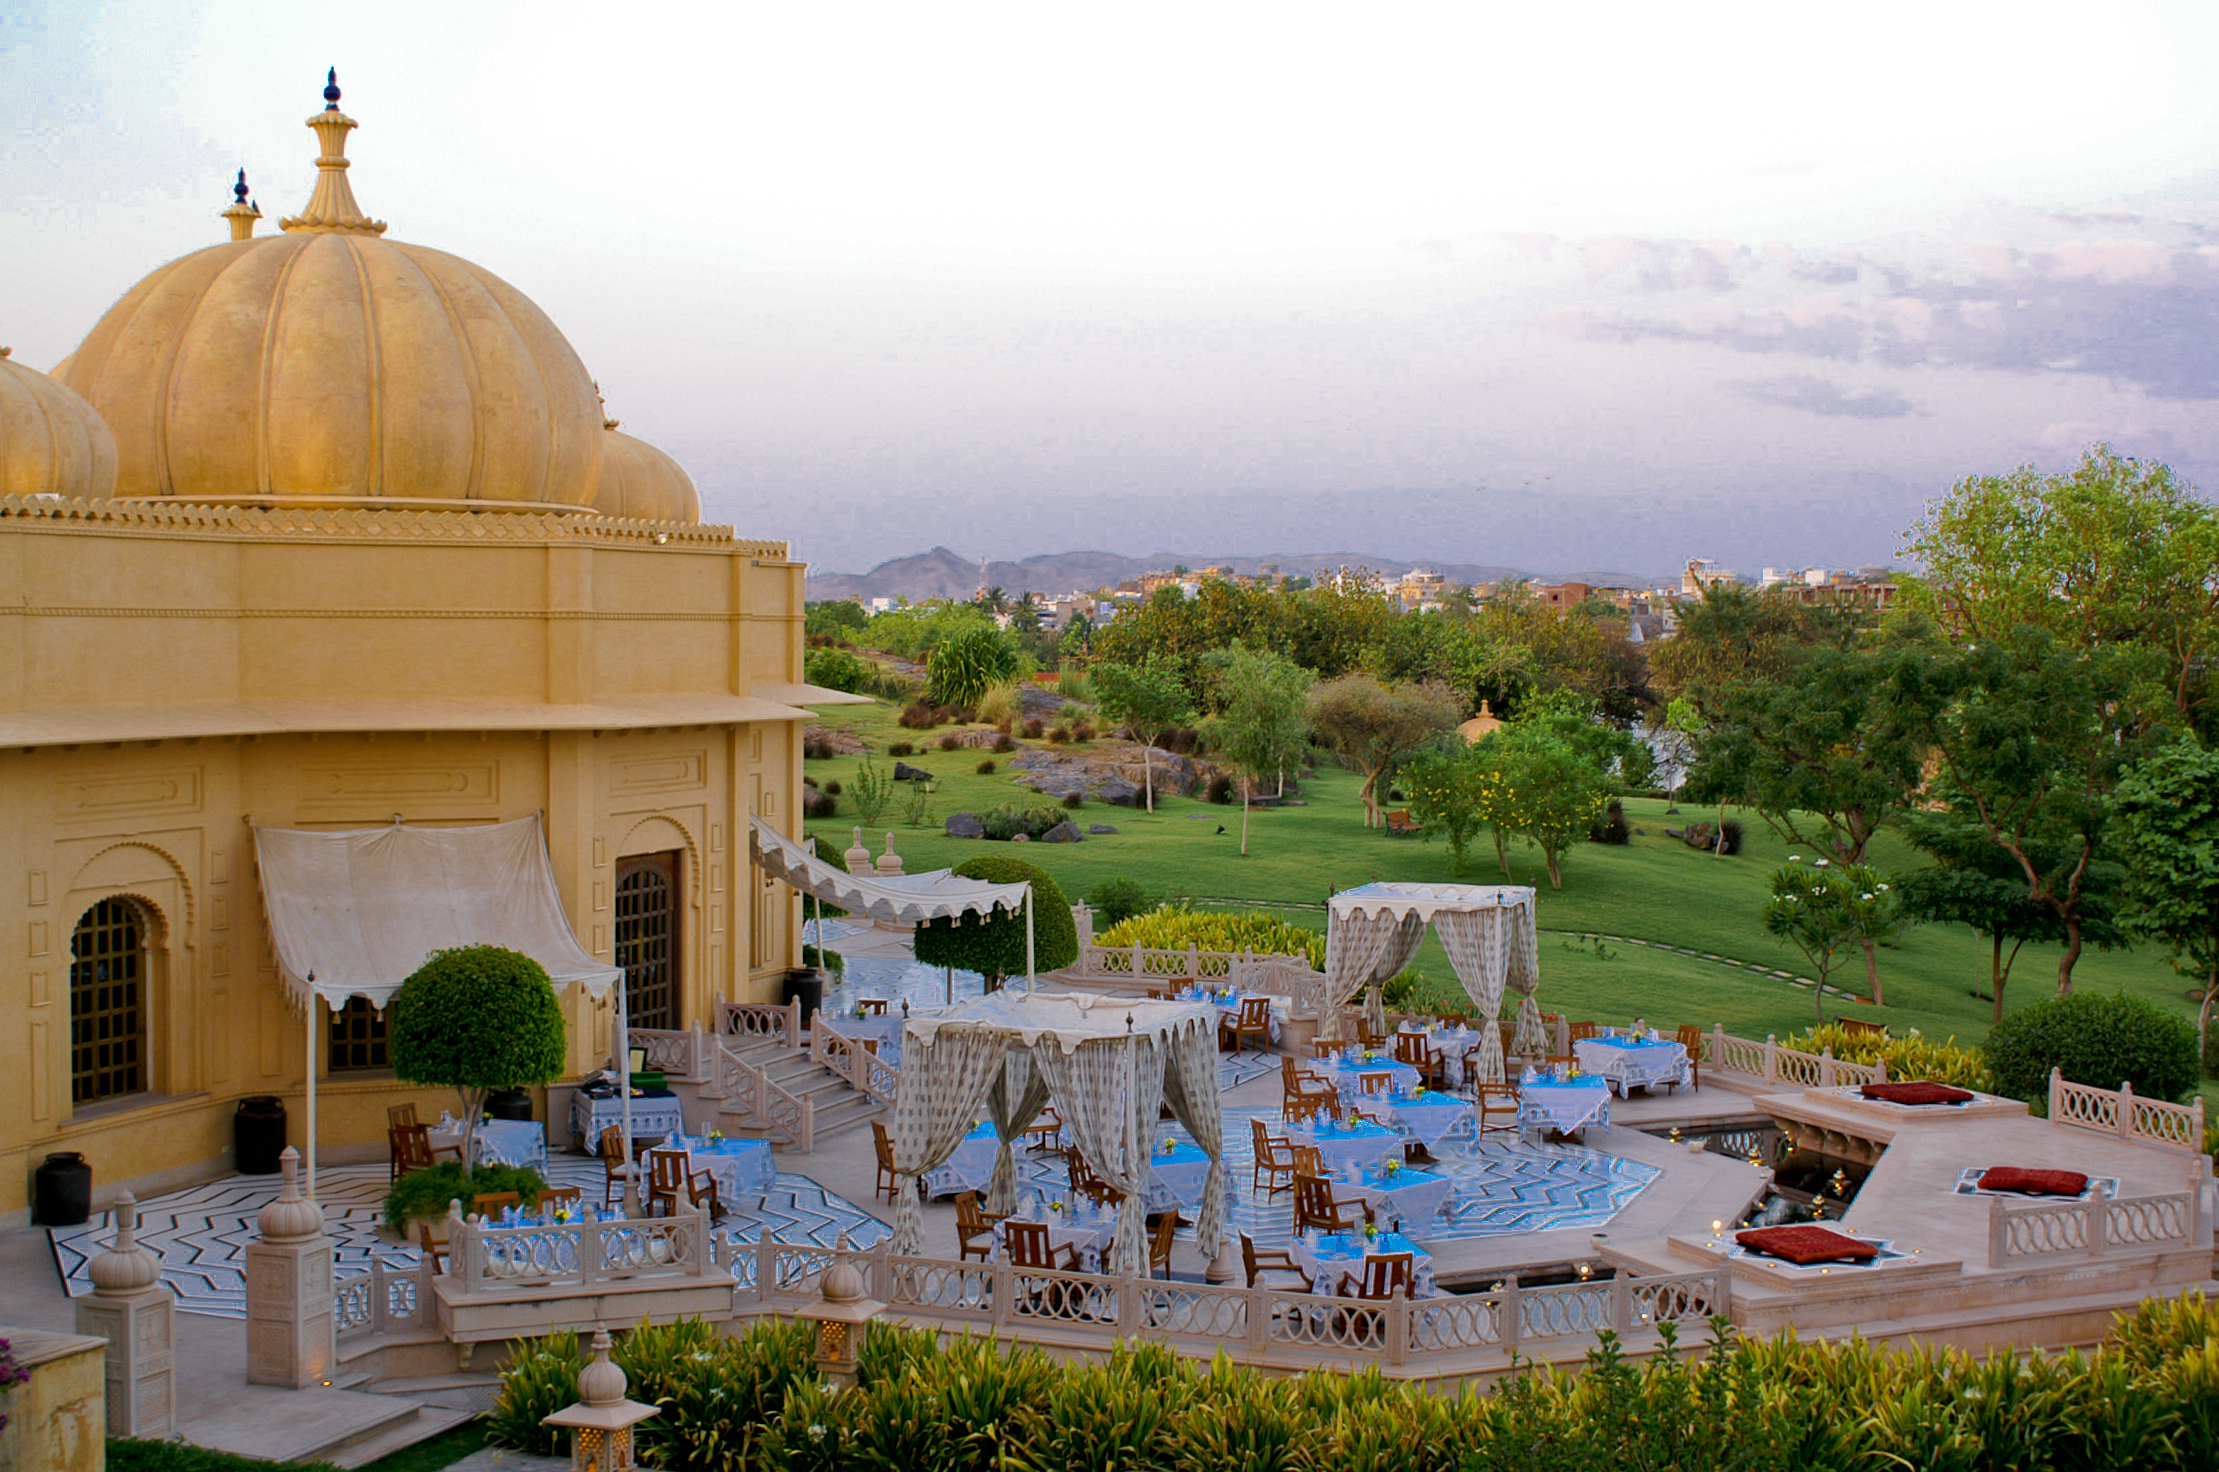 Outside dinner cover at Oberoi Udaivilas luxury hotel in Udaipur, Rajasthan, India